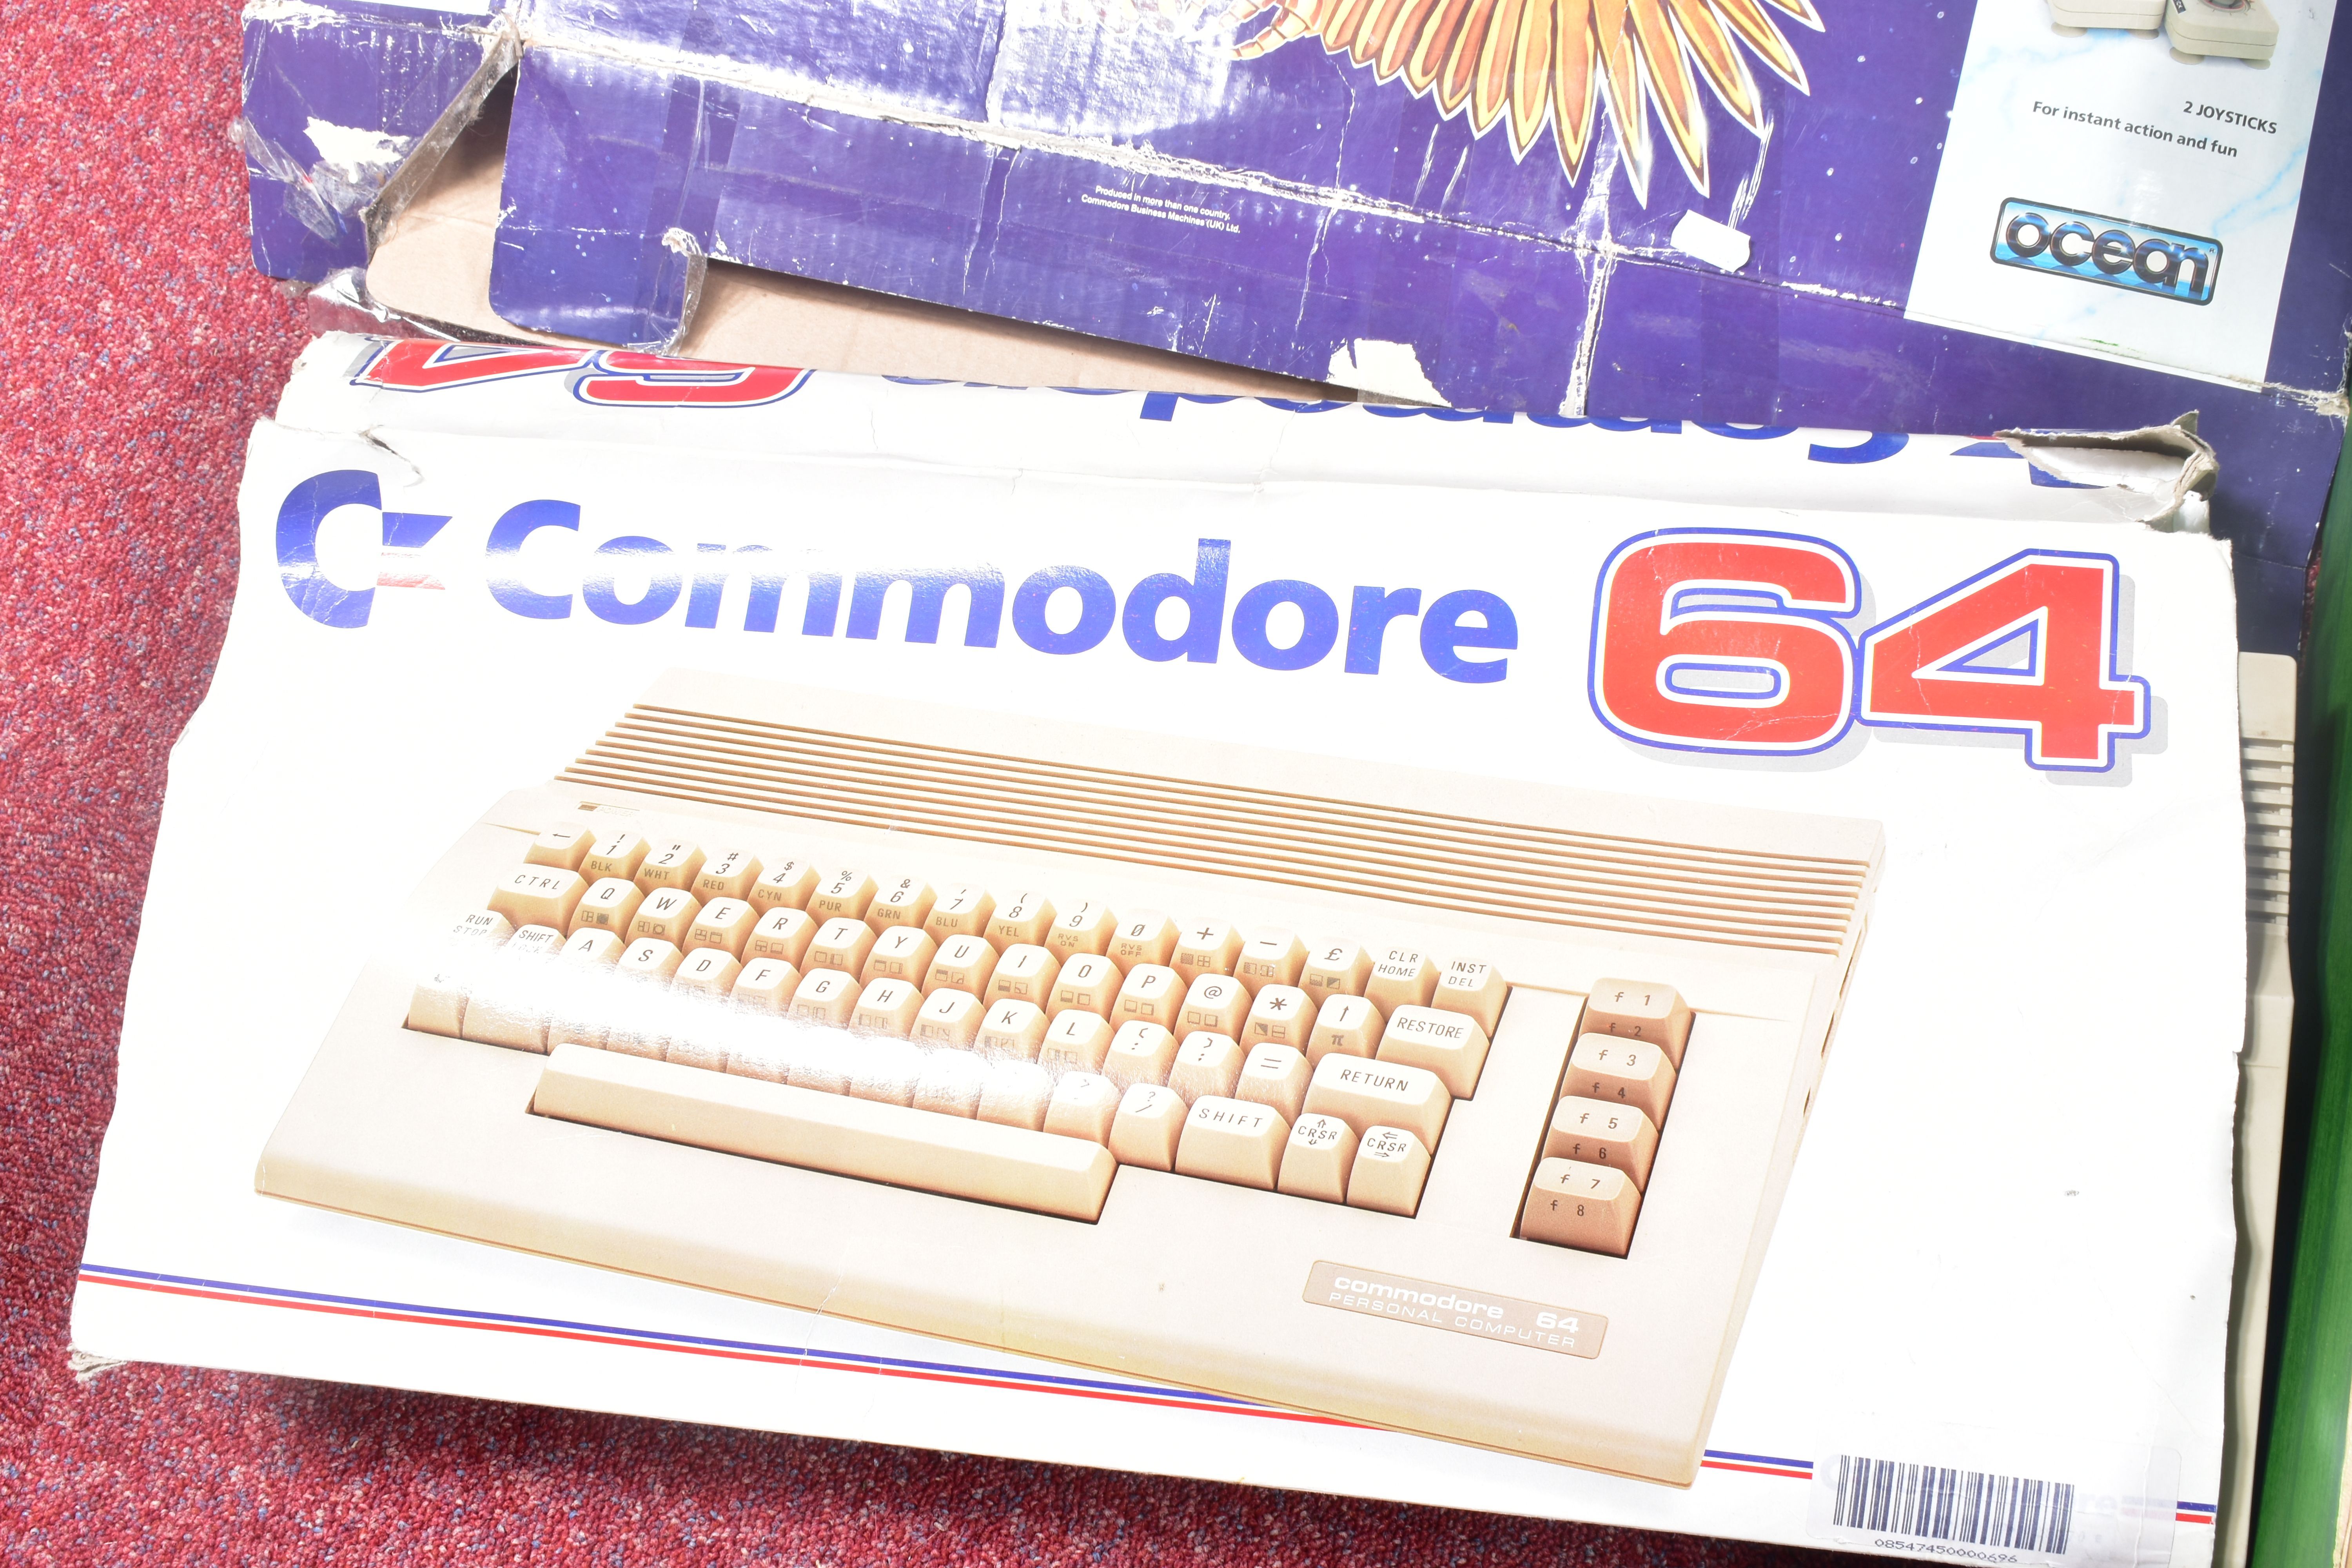 A BOXED COMMODORE 64 (C64 MODEL), ACCESSORIES AND A QUANTITY OF GAMES, accessories include a - Image 5 of 6